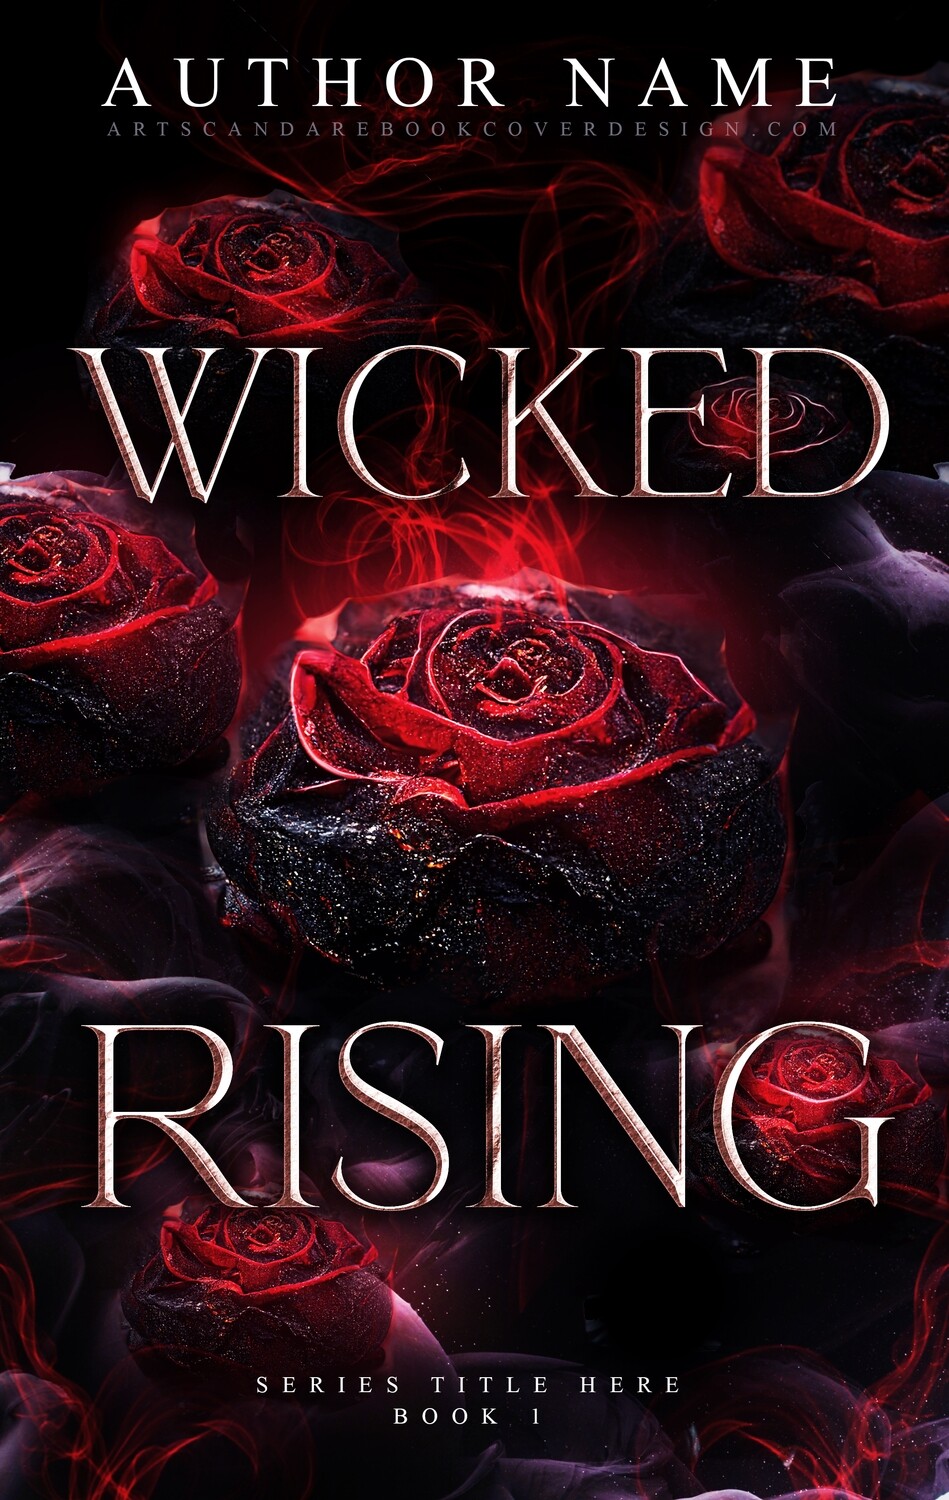 WICKED RISING